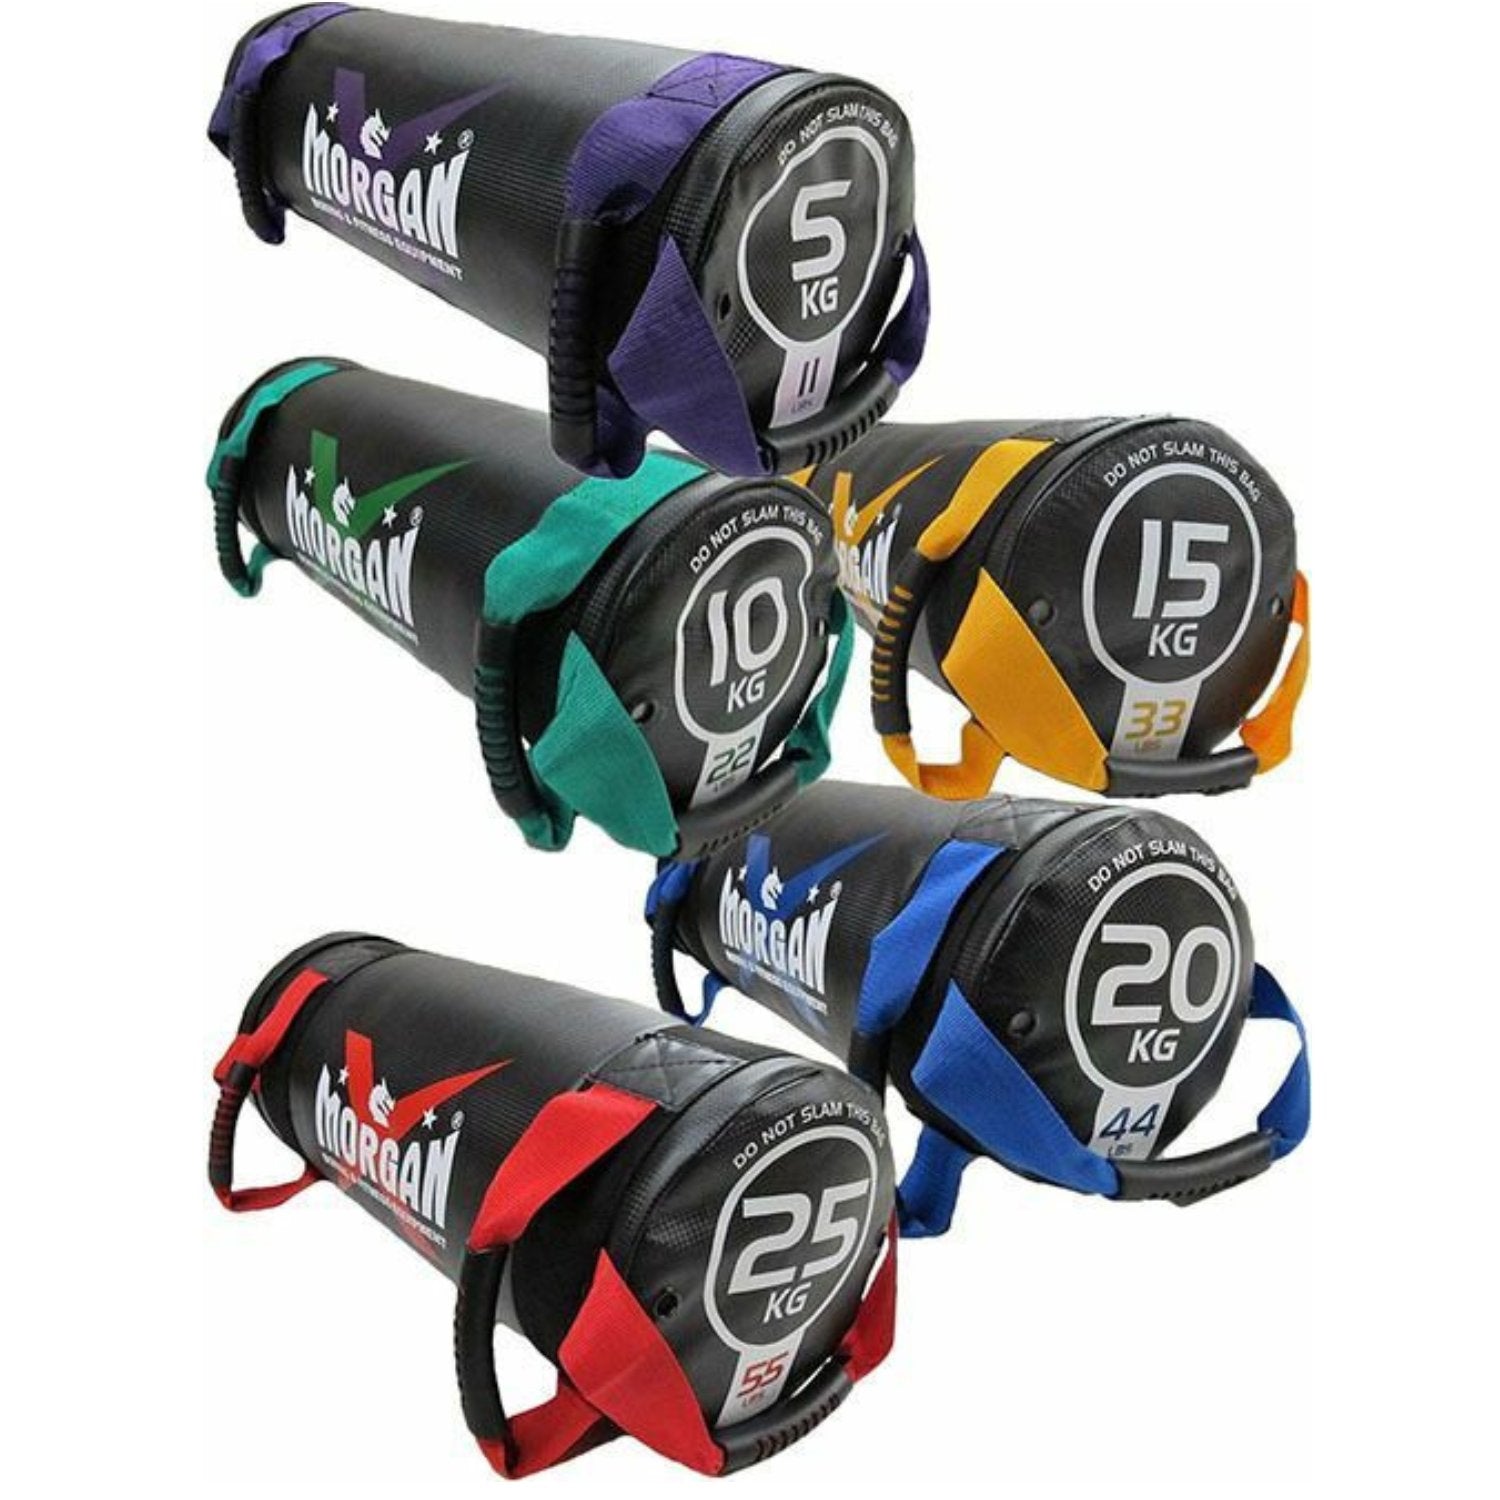 Weight Bags - Easily Portable & Functional Weighted Bags at GD